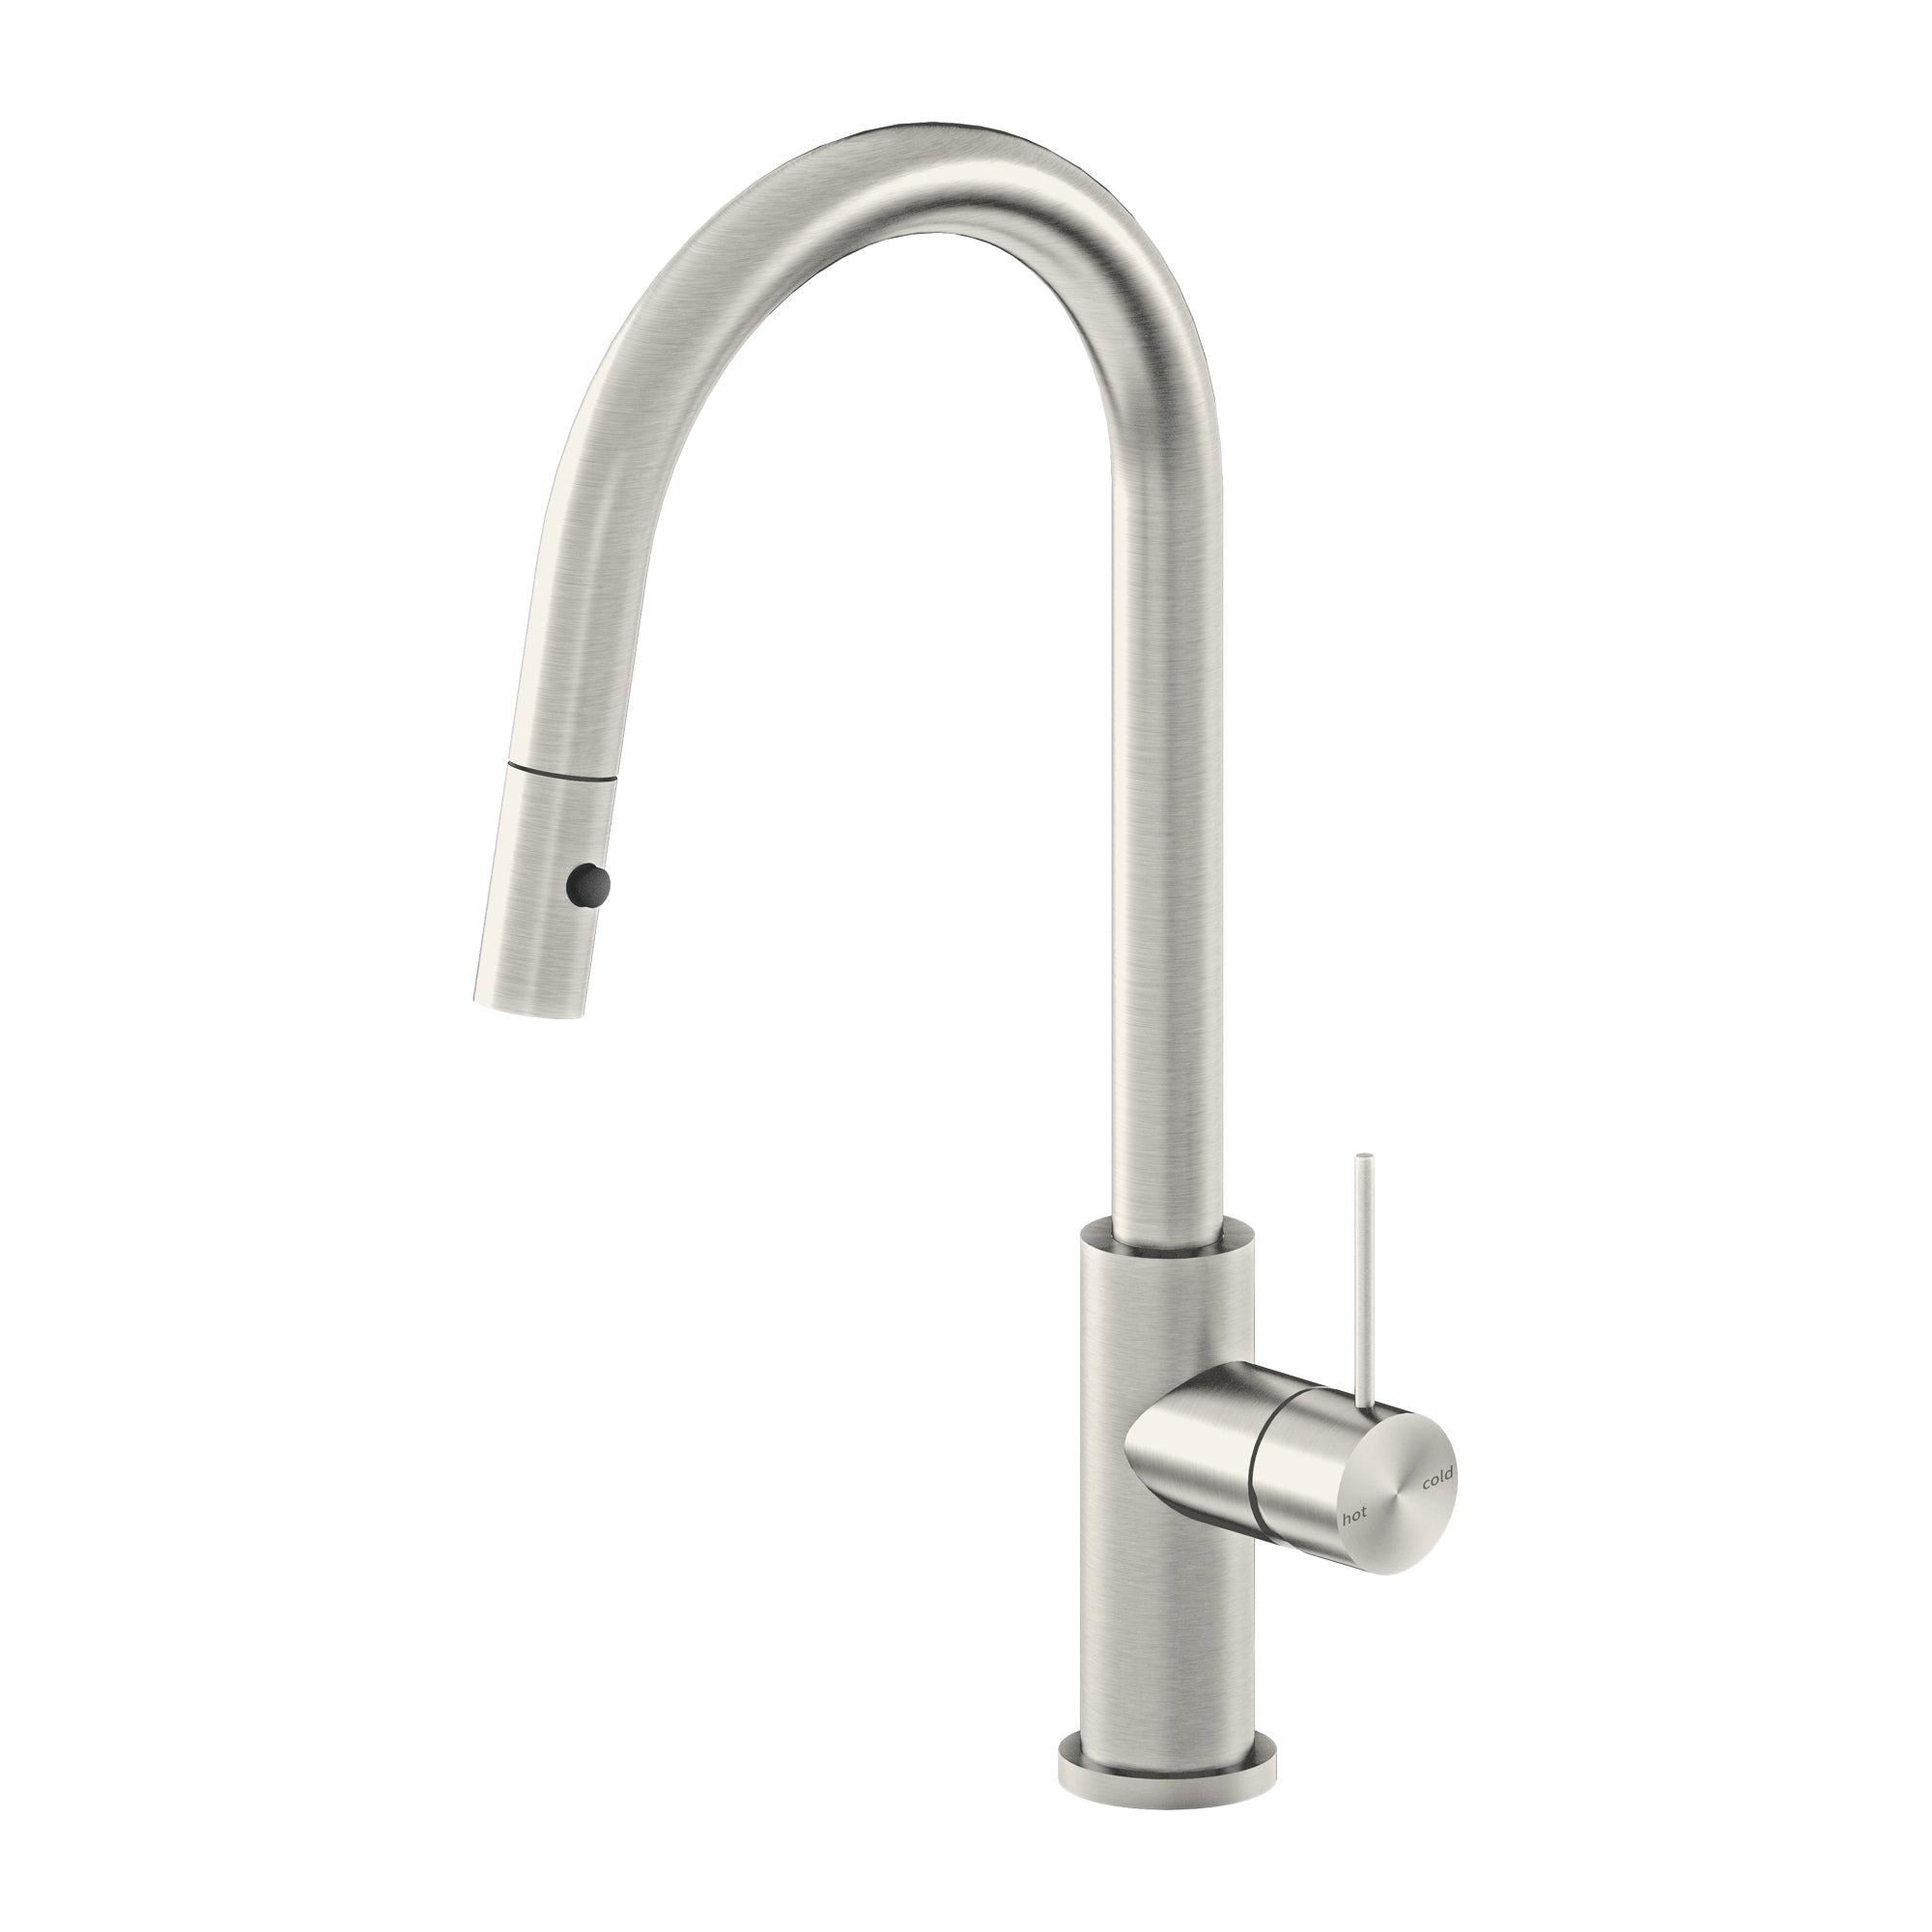 Mecca Pull Out Sink Mixer With Vegie Spray Function Brushed Nickel - NR221908BN